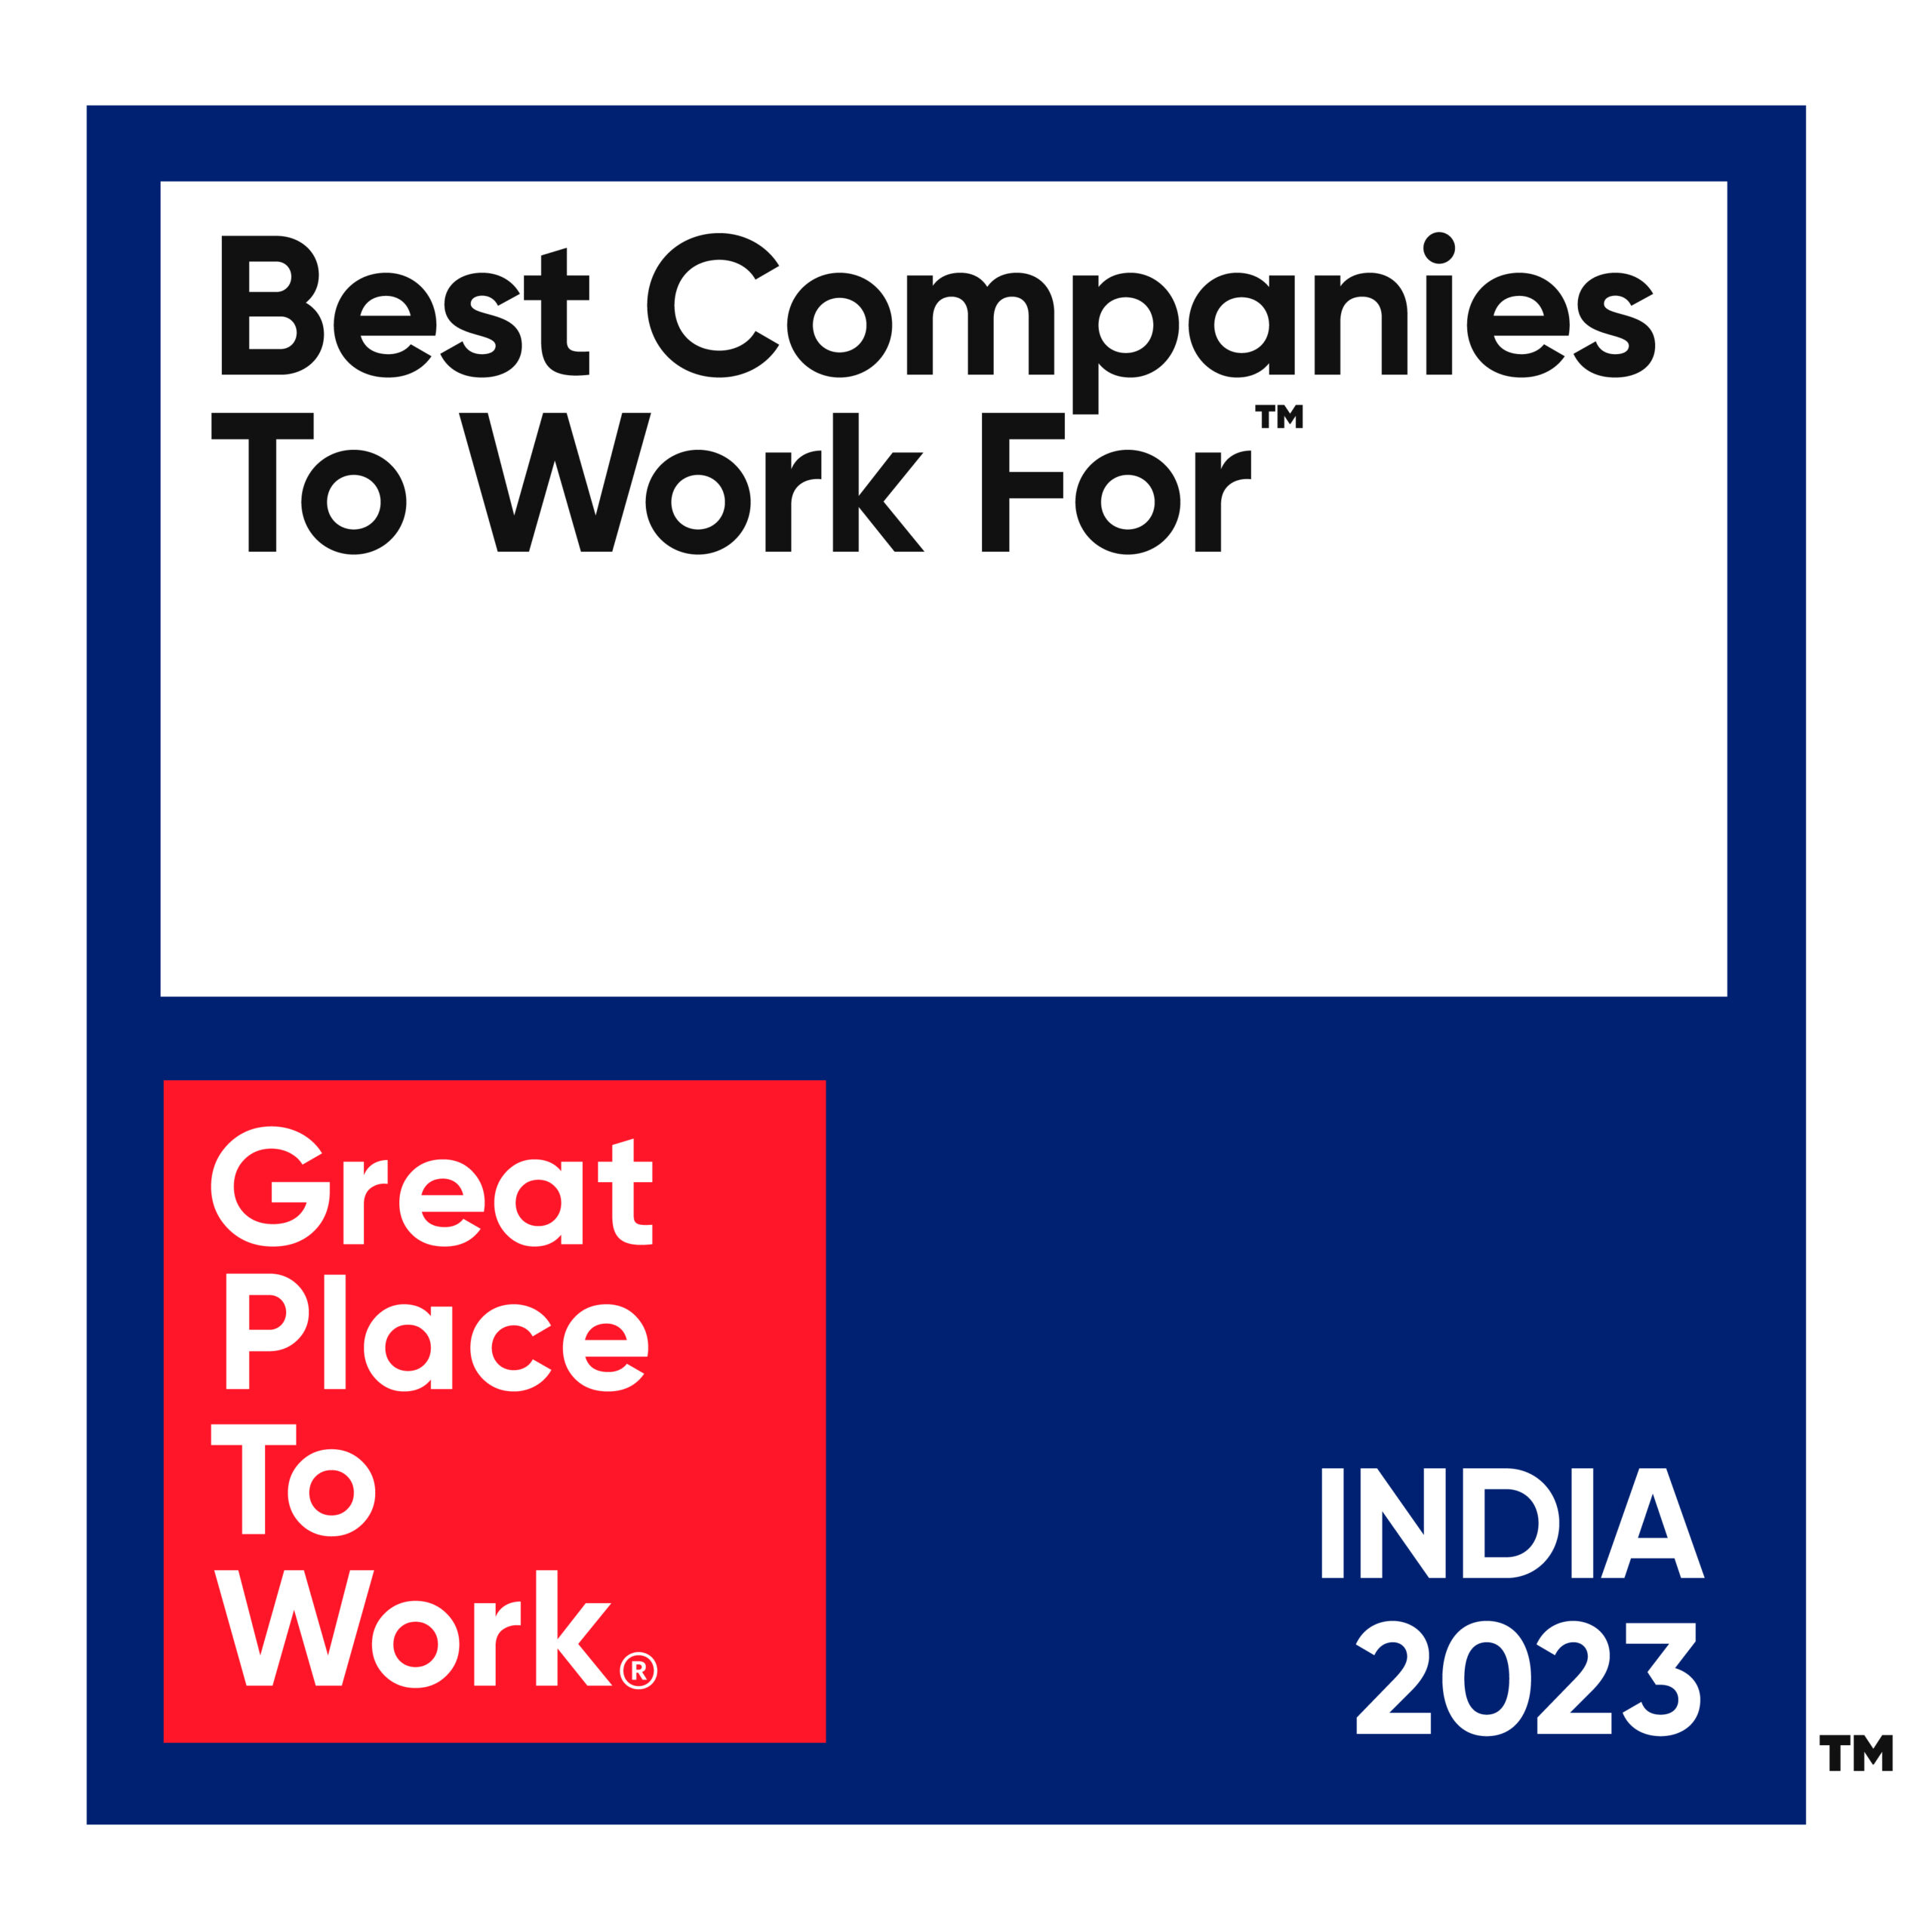 India's Best Companies to Work For 2023